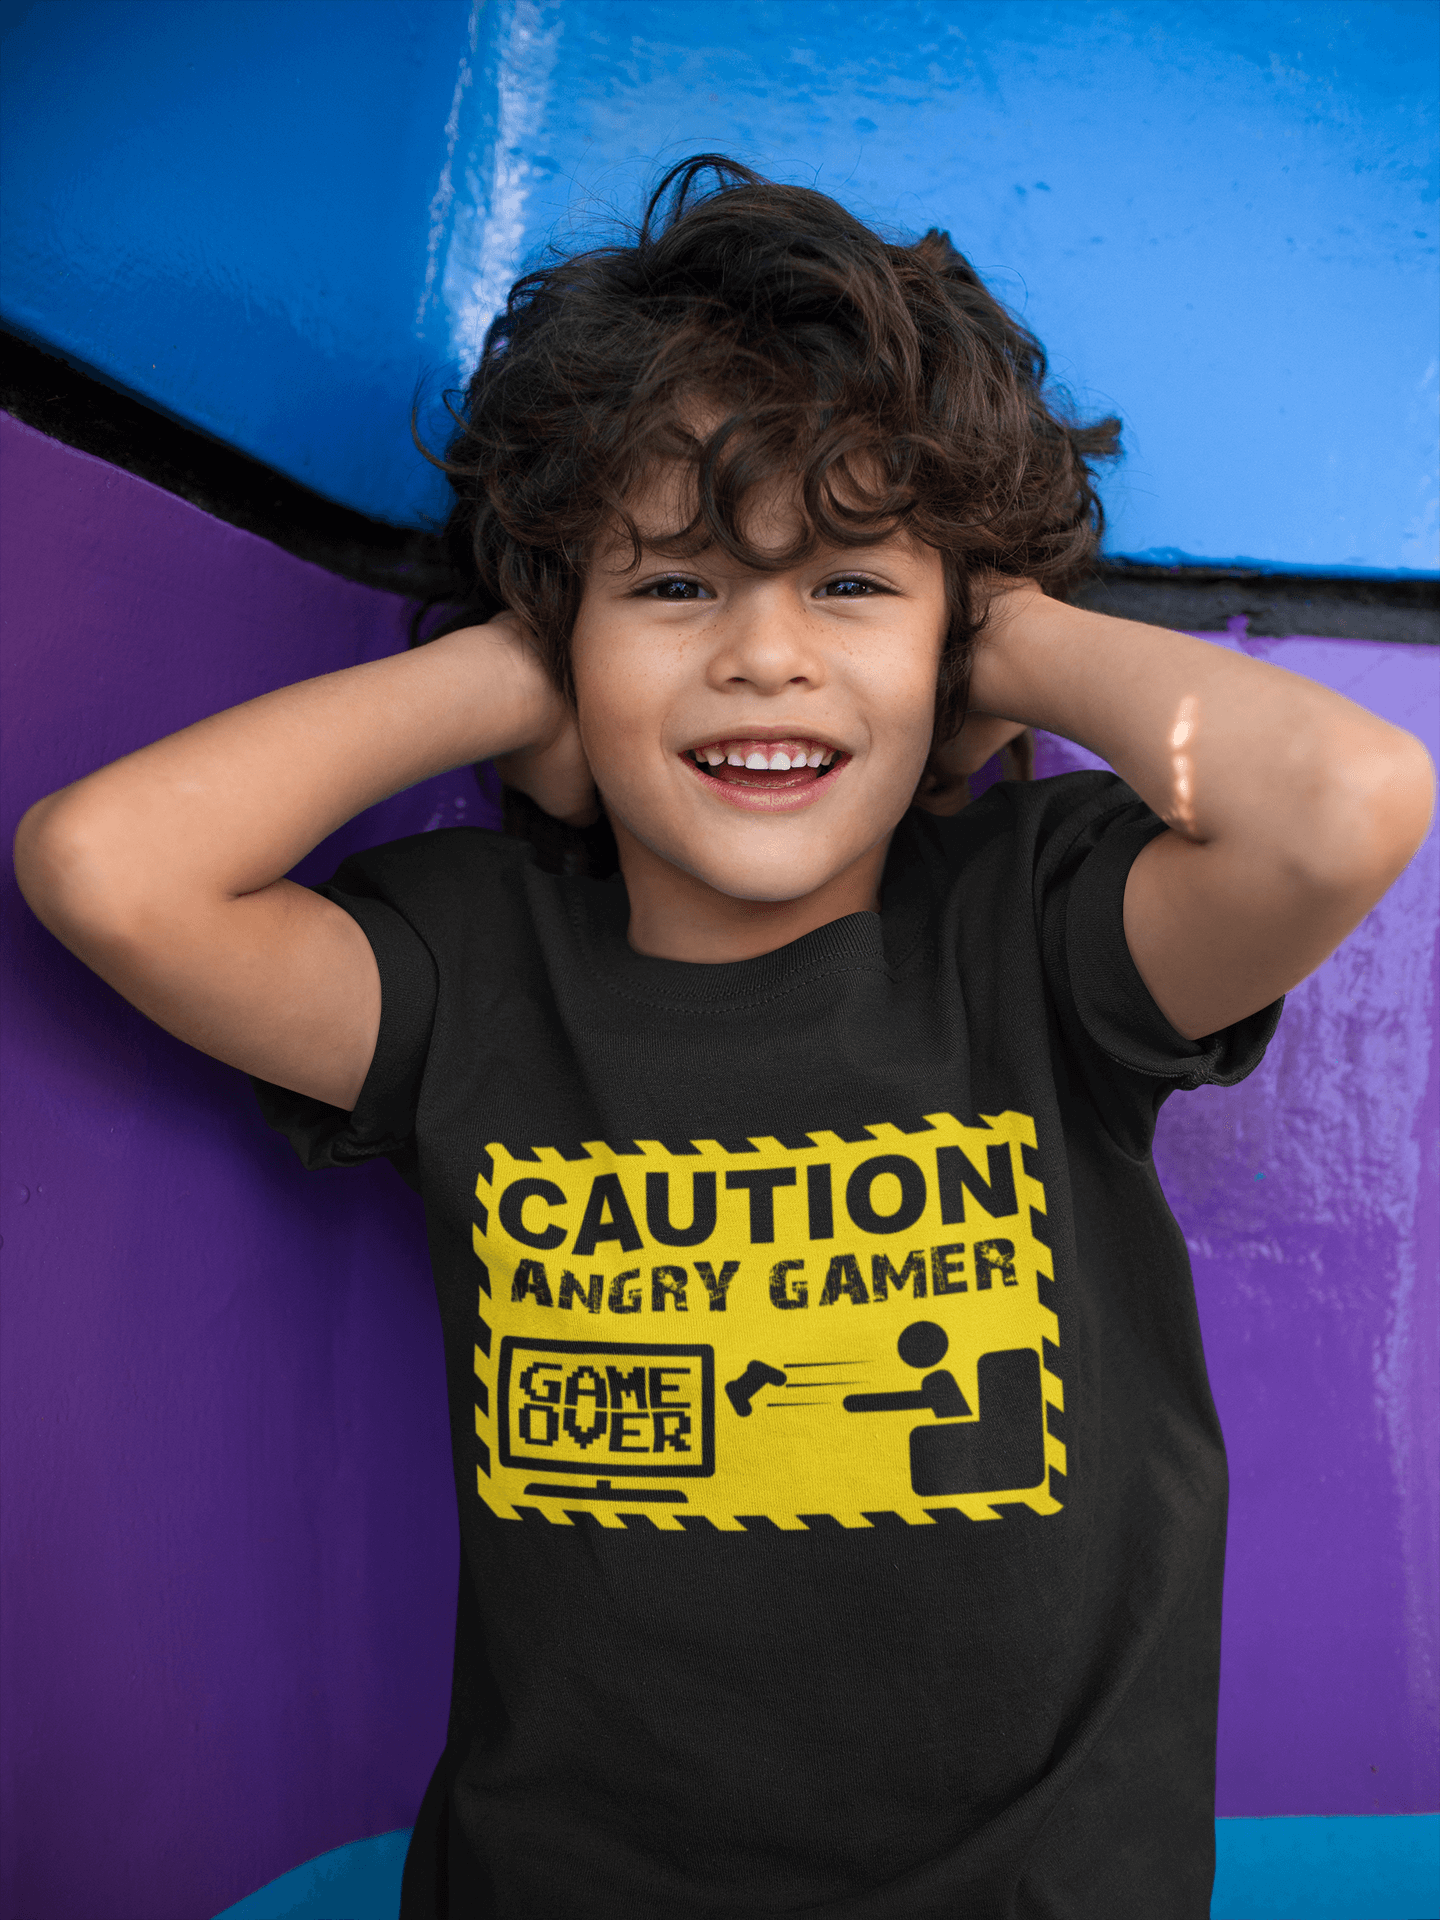 Funny Kids - Caution Angry Gamer Tee!!